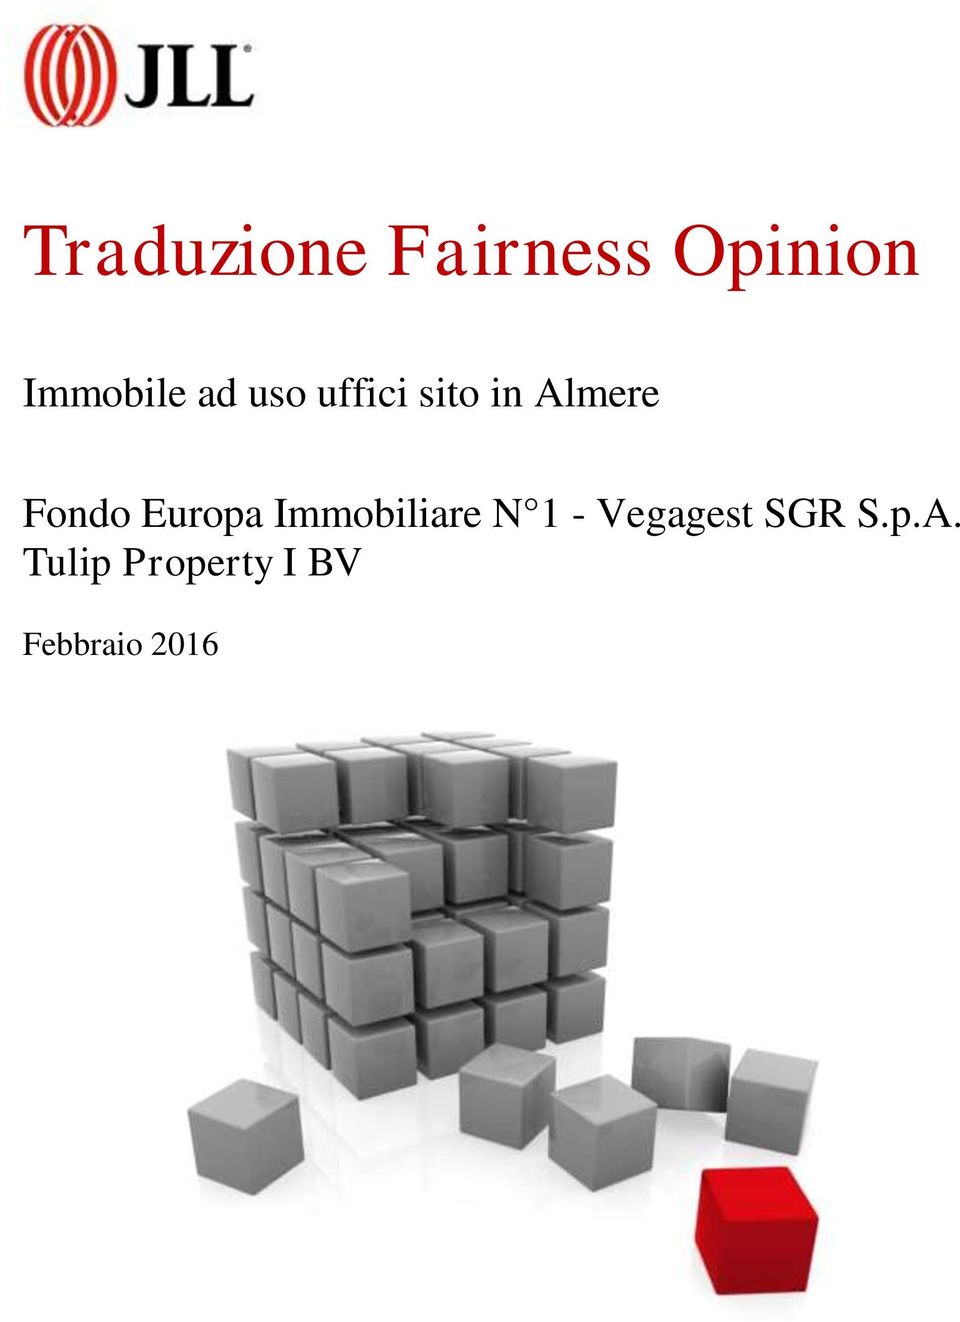 Europa Immobiliare N 1 - Vegagest SGR